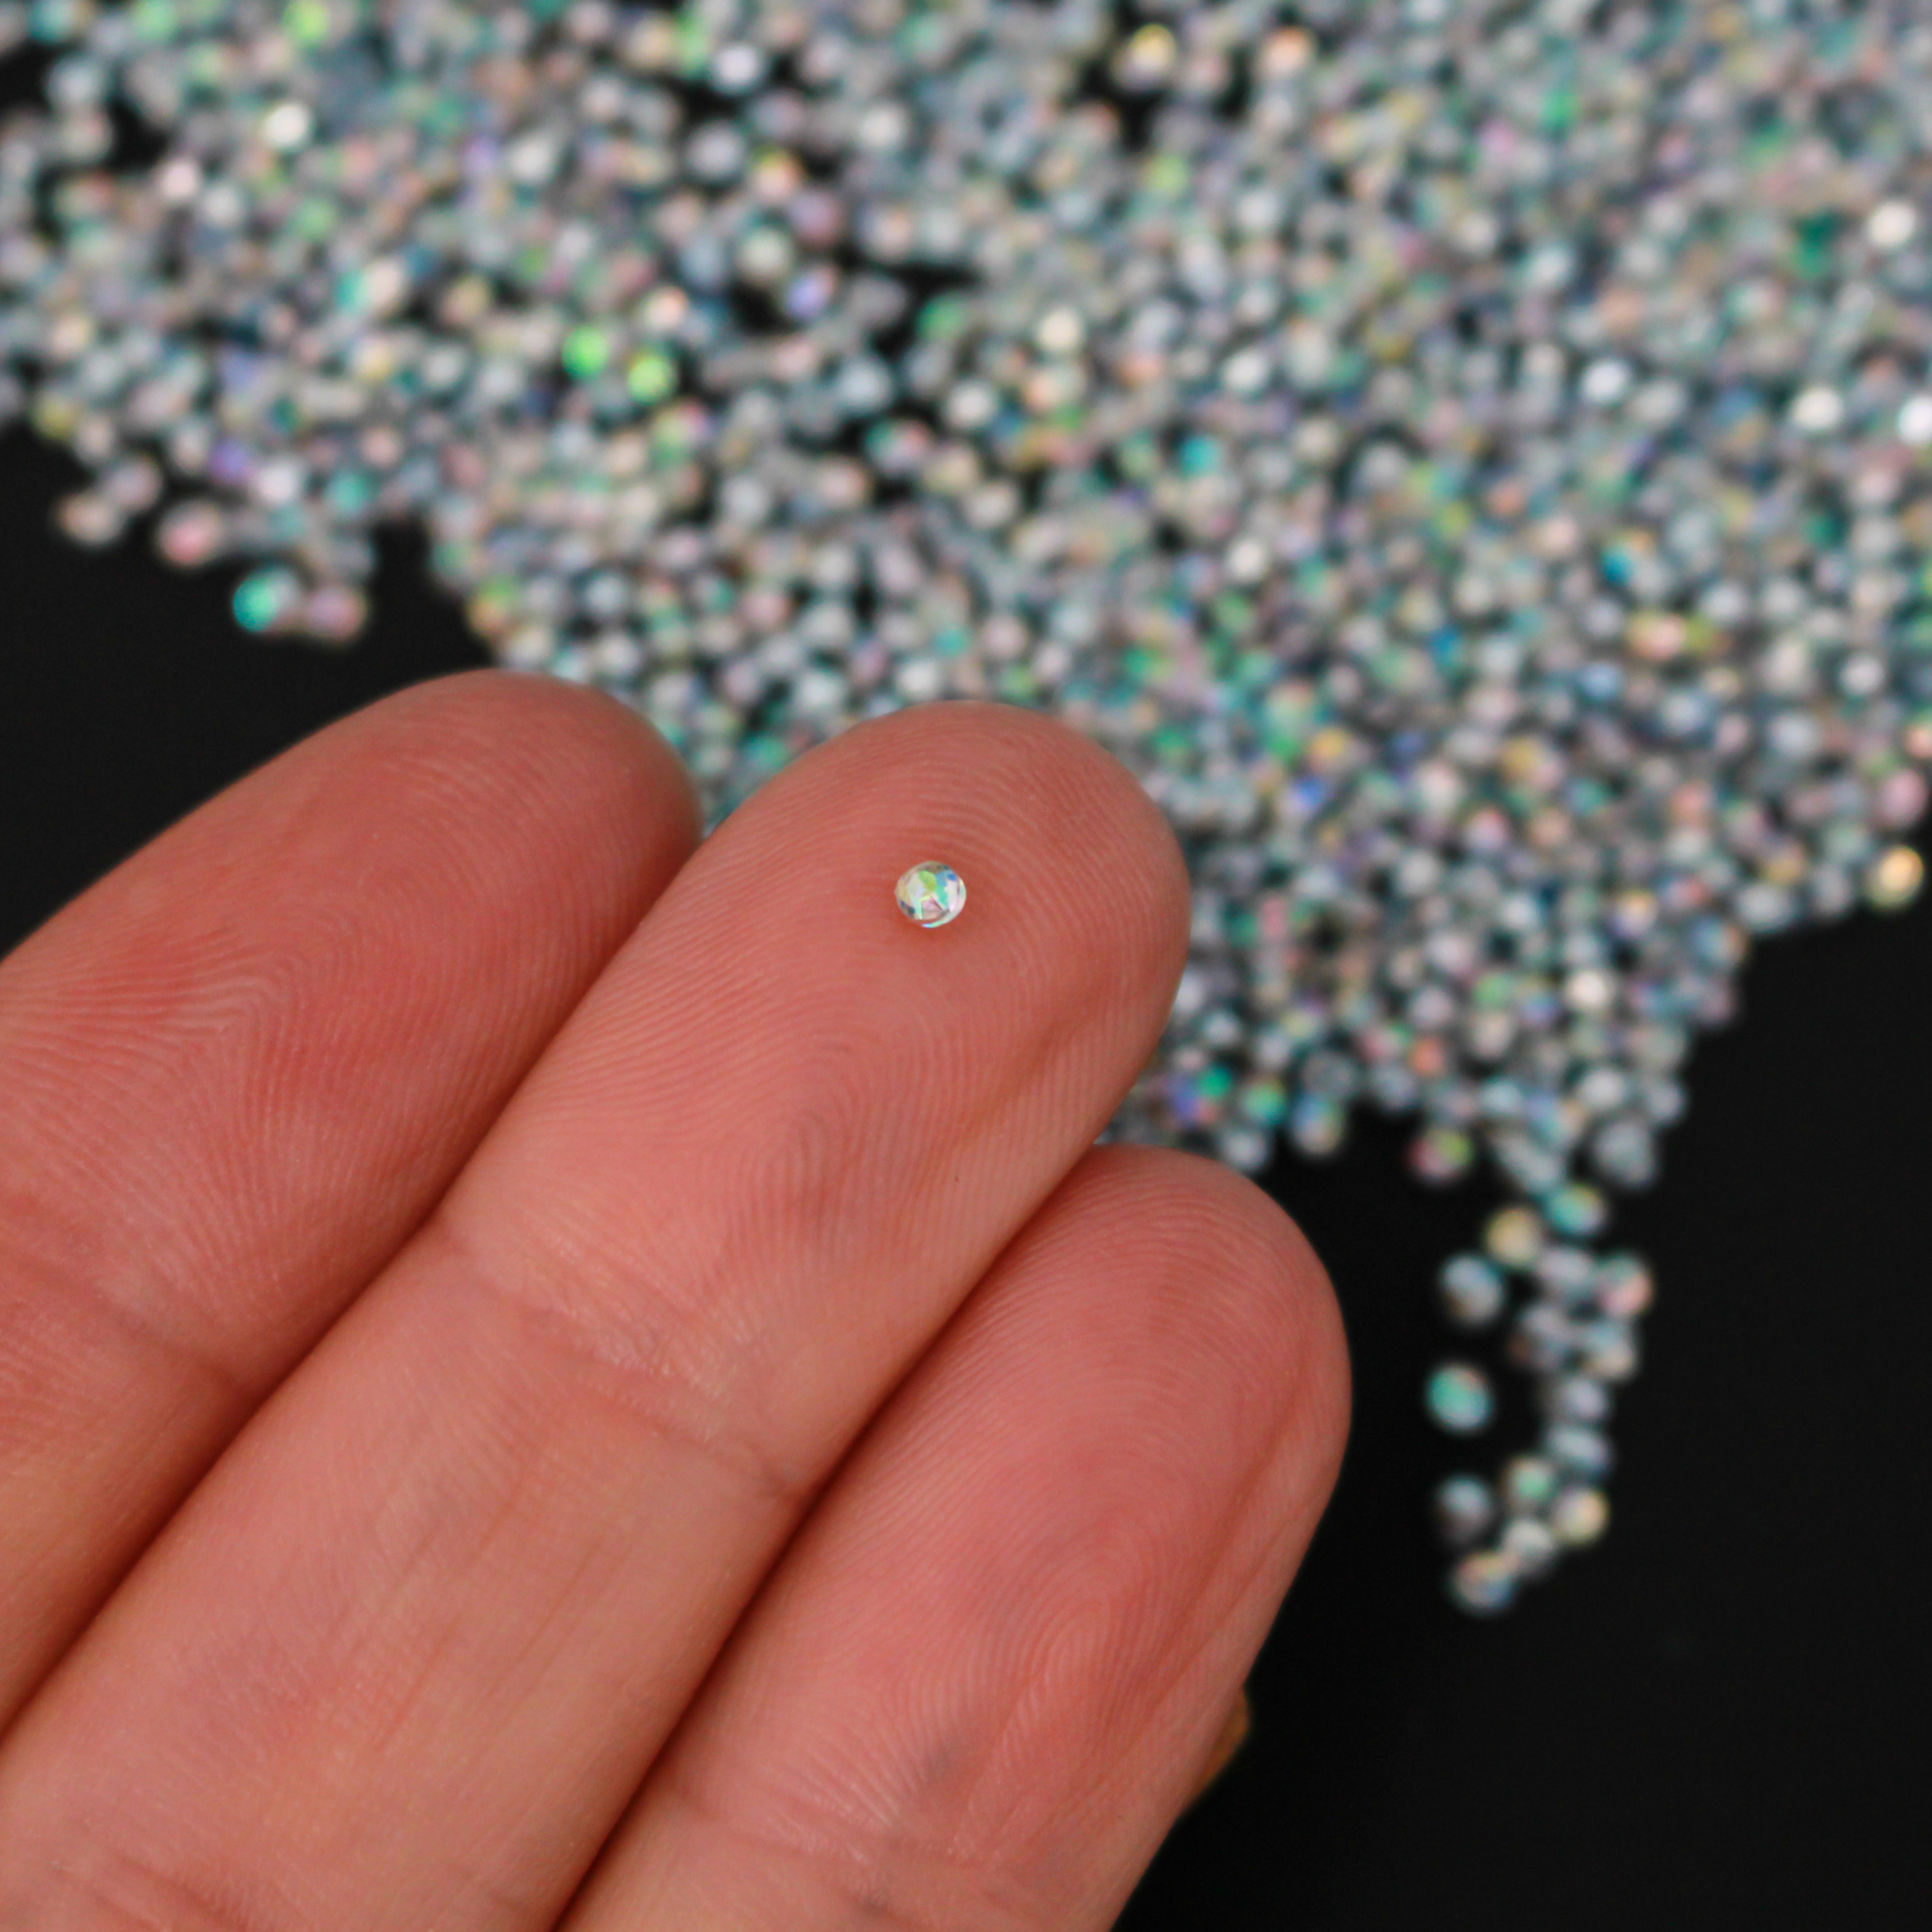 Tiny acrylic (imitation) rhinestones that are an AB crystal color with a pointed back and faceted front